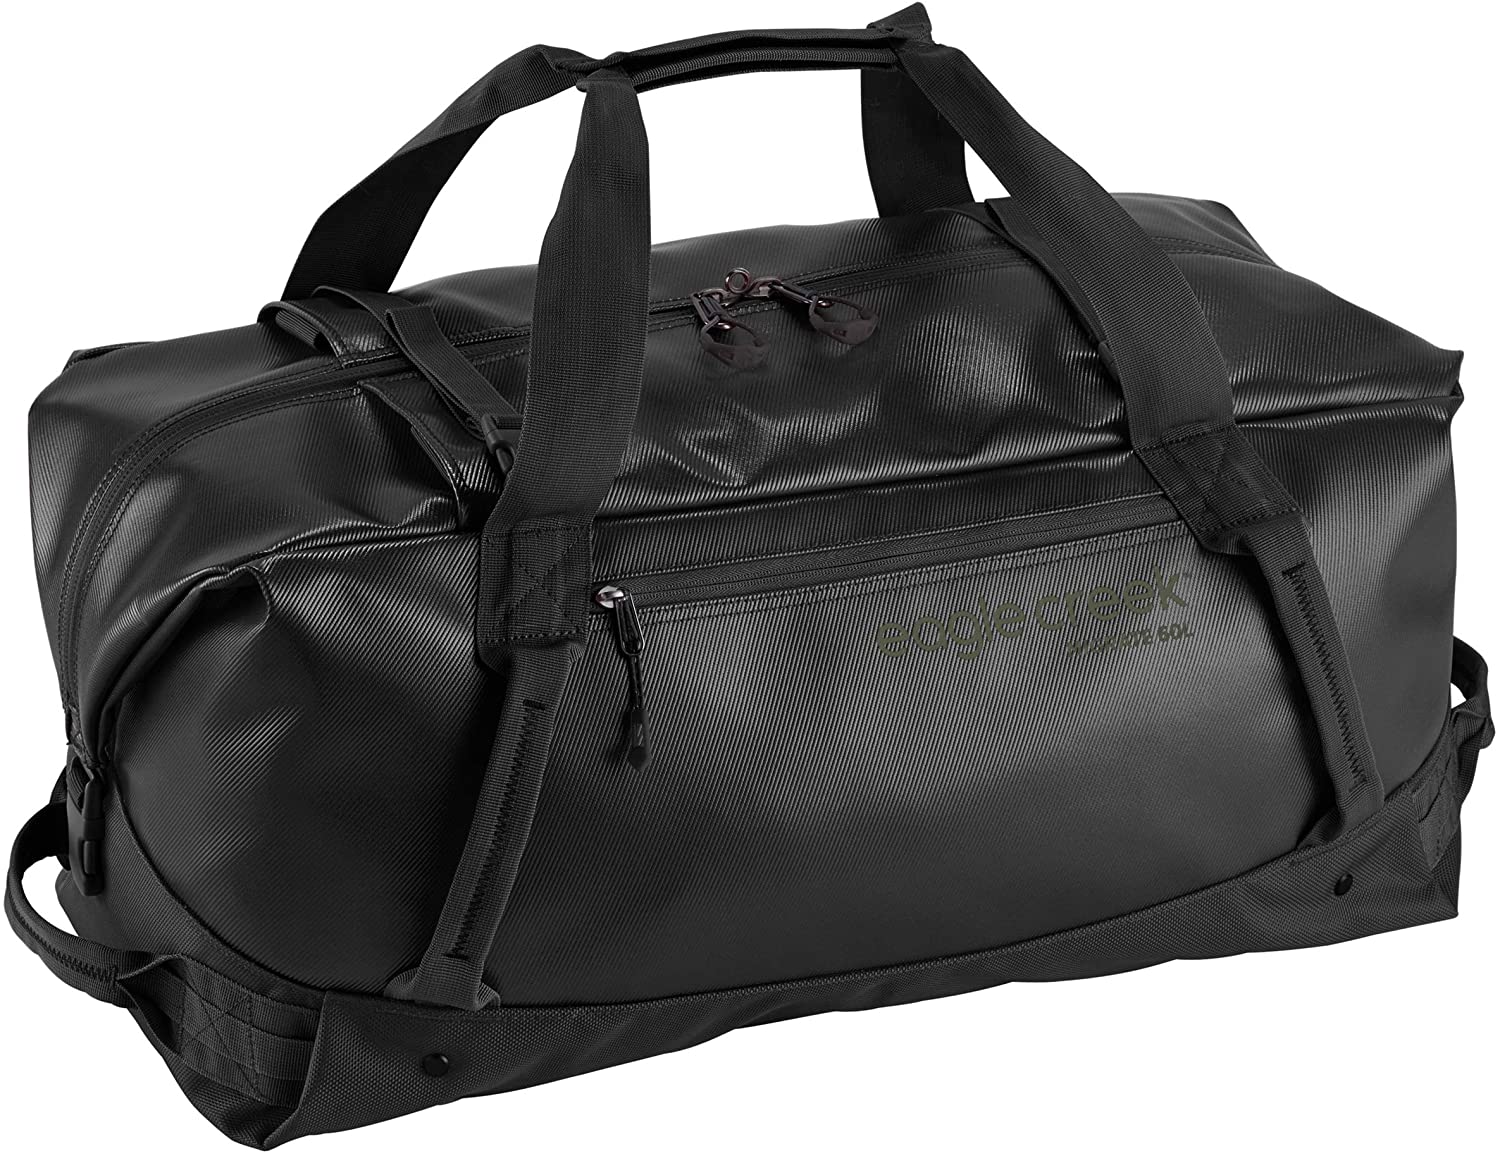 Eagle Creek Migrate Duffel 60L in Jet Black color from the front